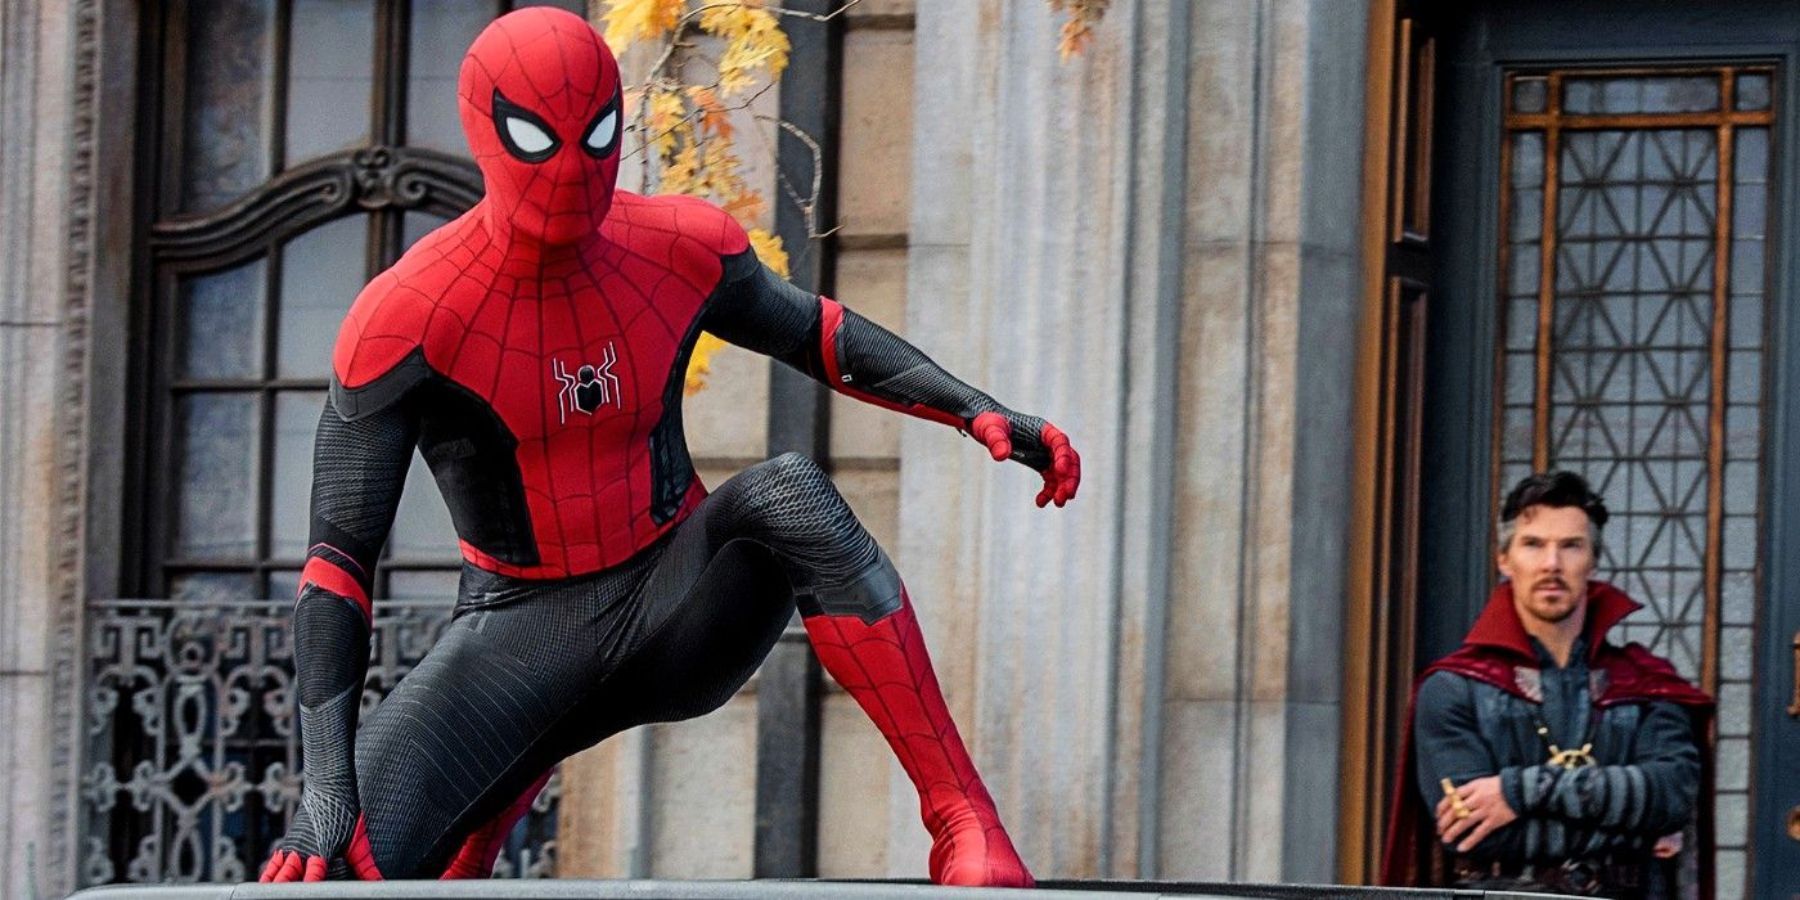 Spider-Man No Way Home Projected To Boast $200M Opening Weekend